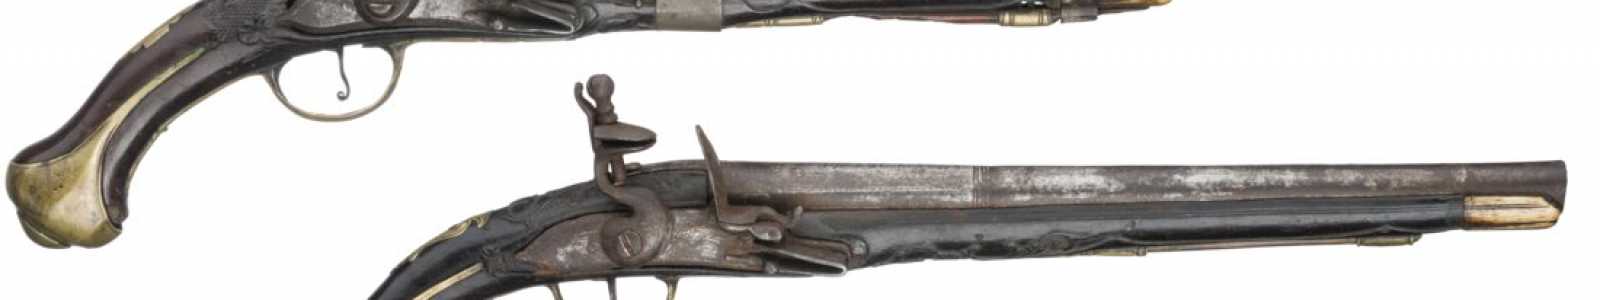 97: Fine Antique and Modern Firearms